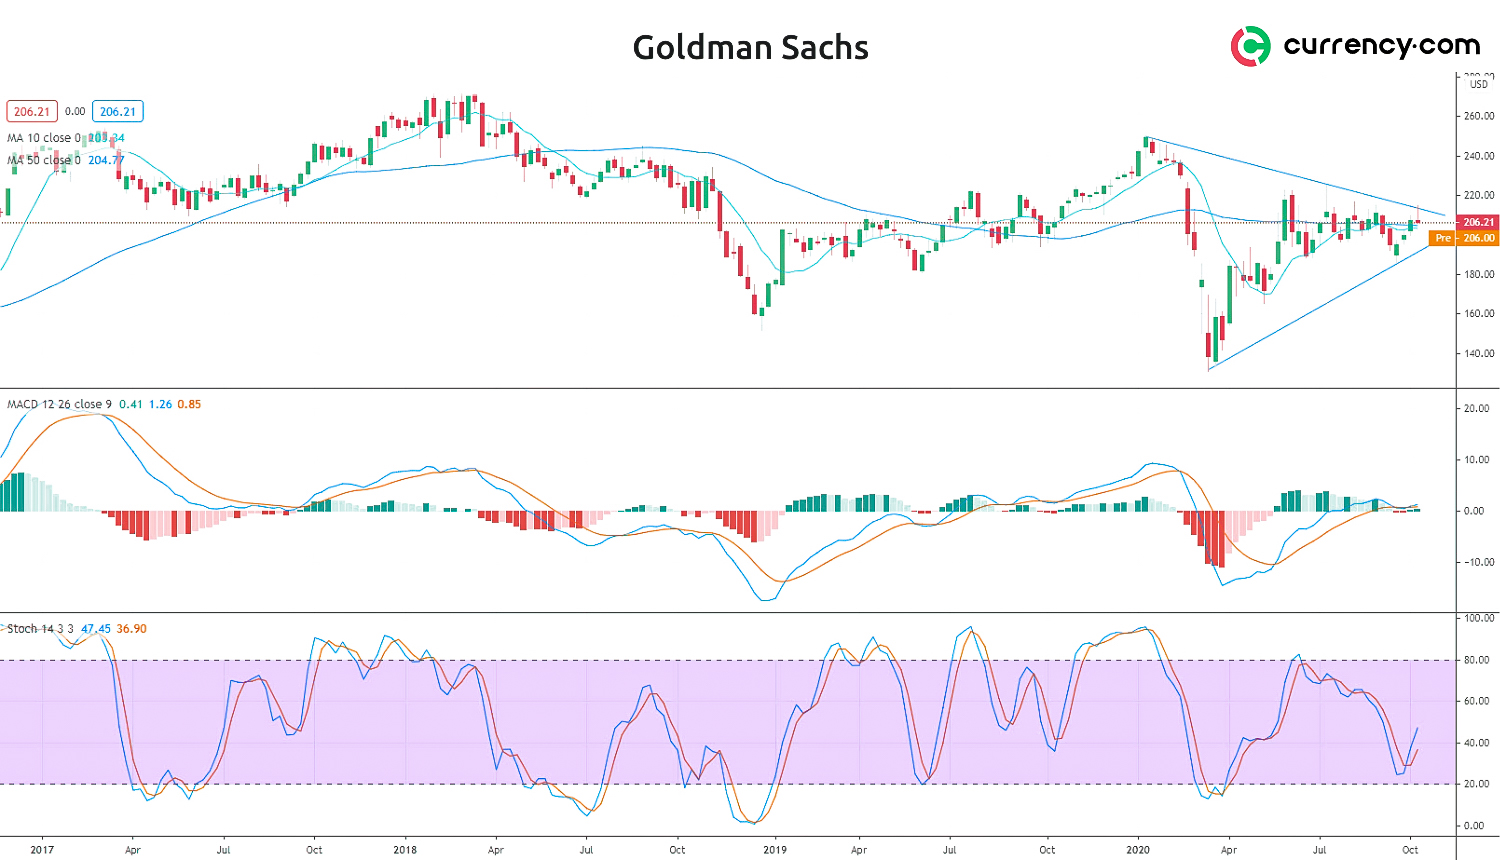 Goldman Sachs stock analysis will the price stand still in November